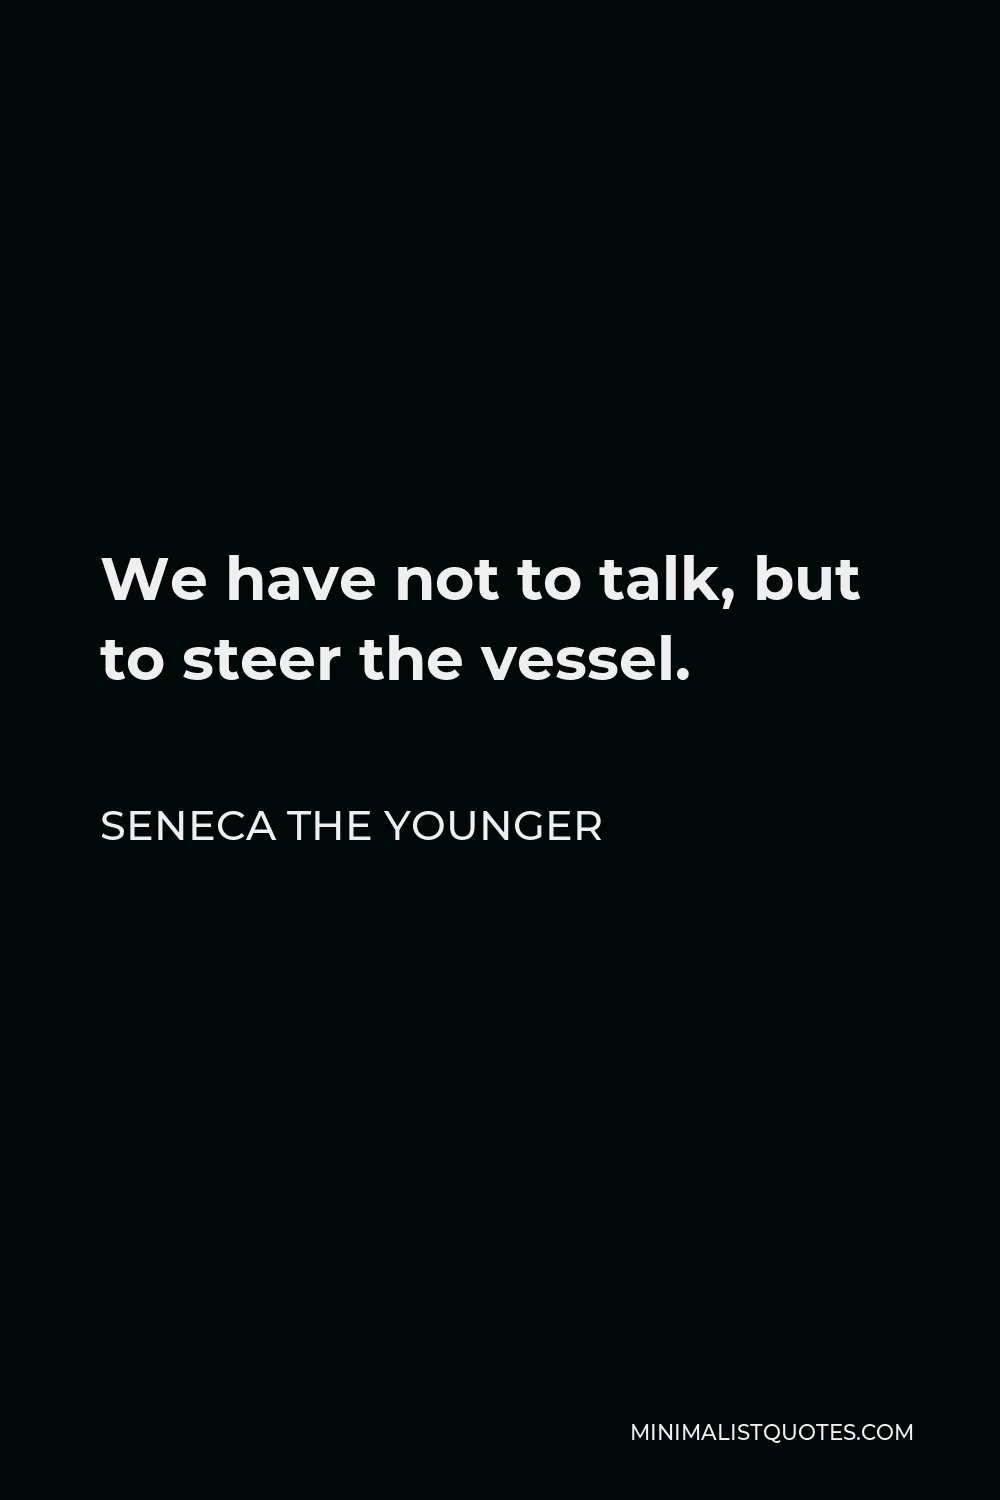 Seneca the Younger Quote - We have not to talk, but to steer the vessel.